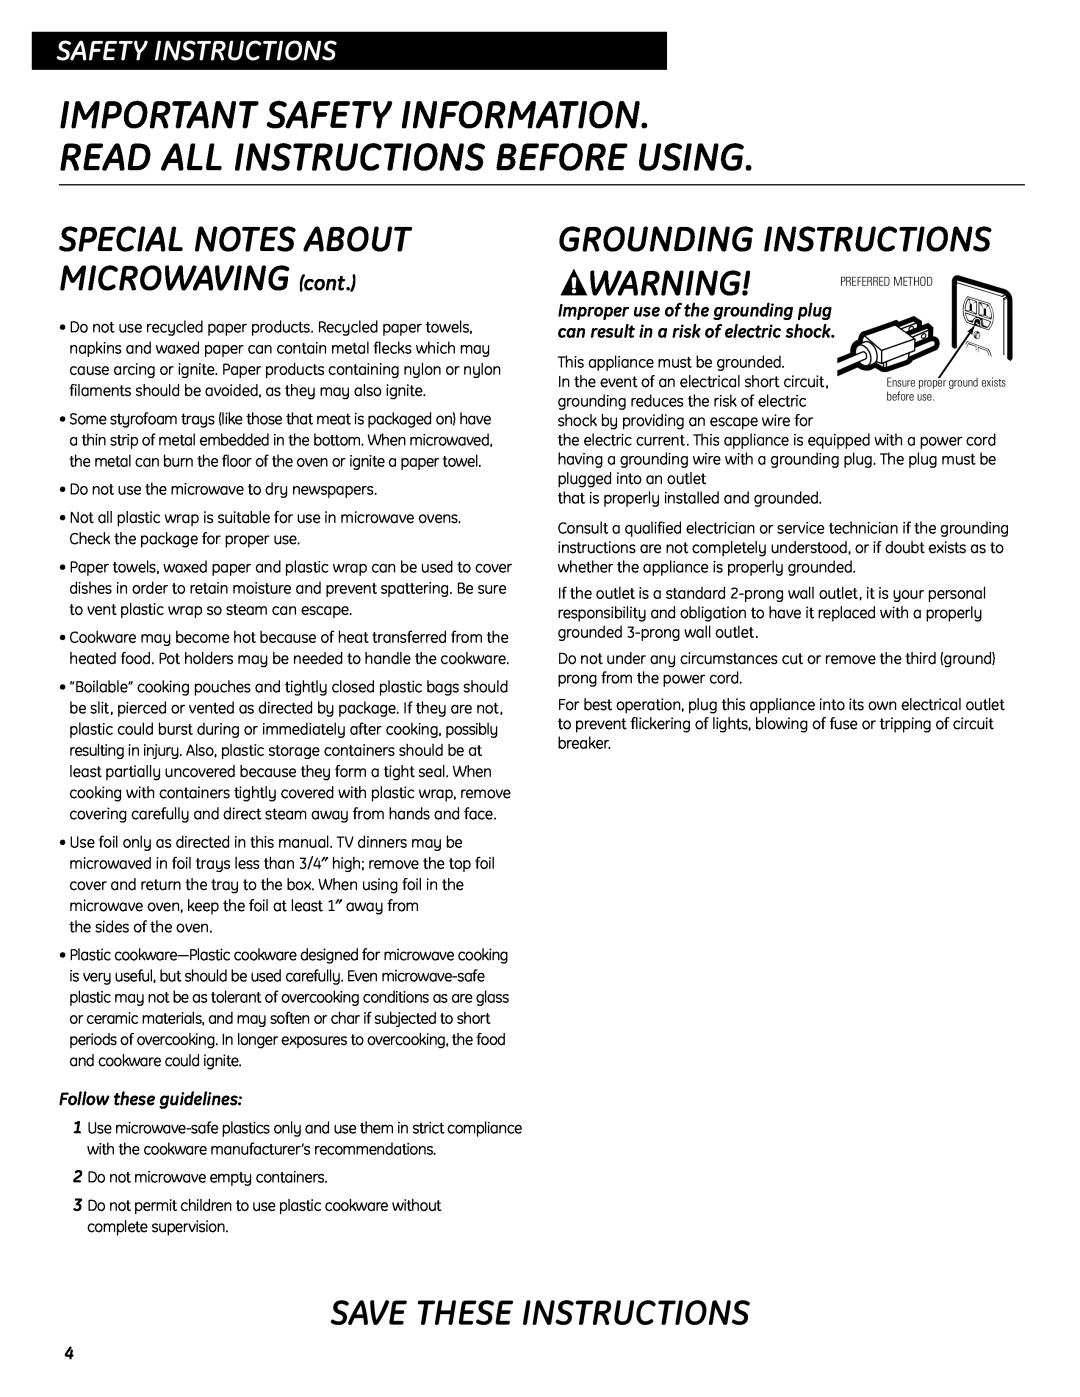 GE SES0732 Grounding Instructions, Follow these guidelines, Save These Instructions, SPECIAL NOTES ABOUT MICROWAVING cont 